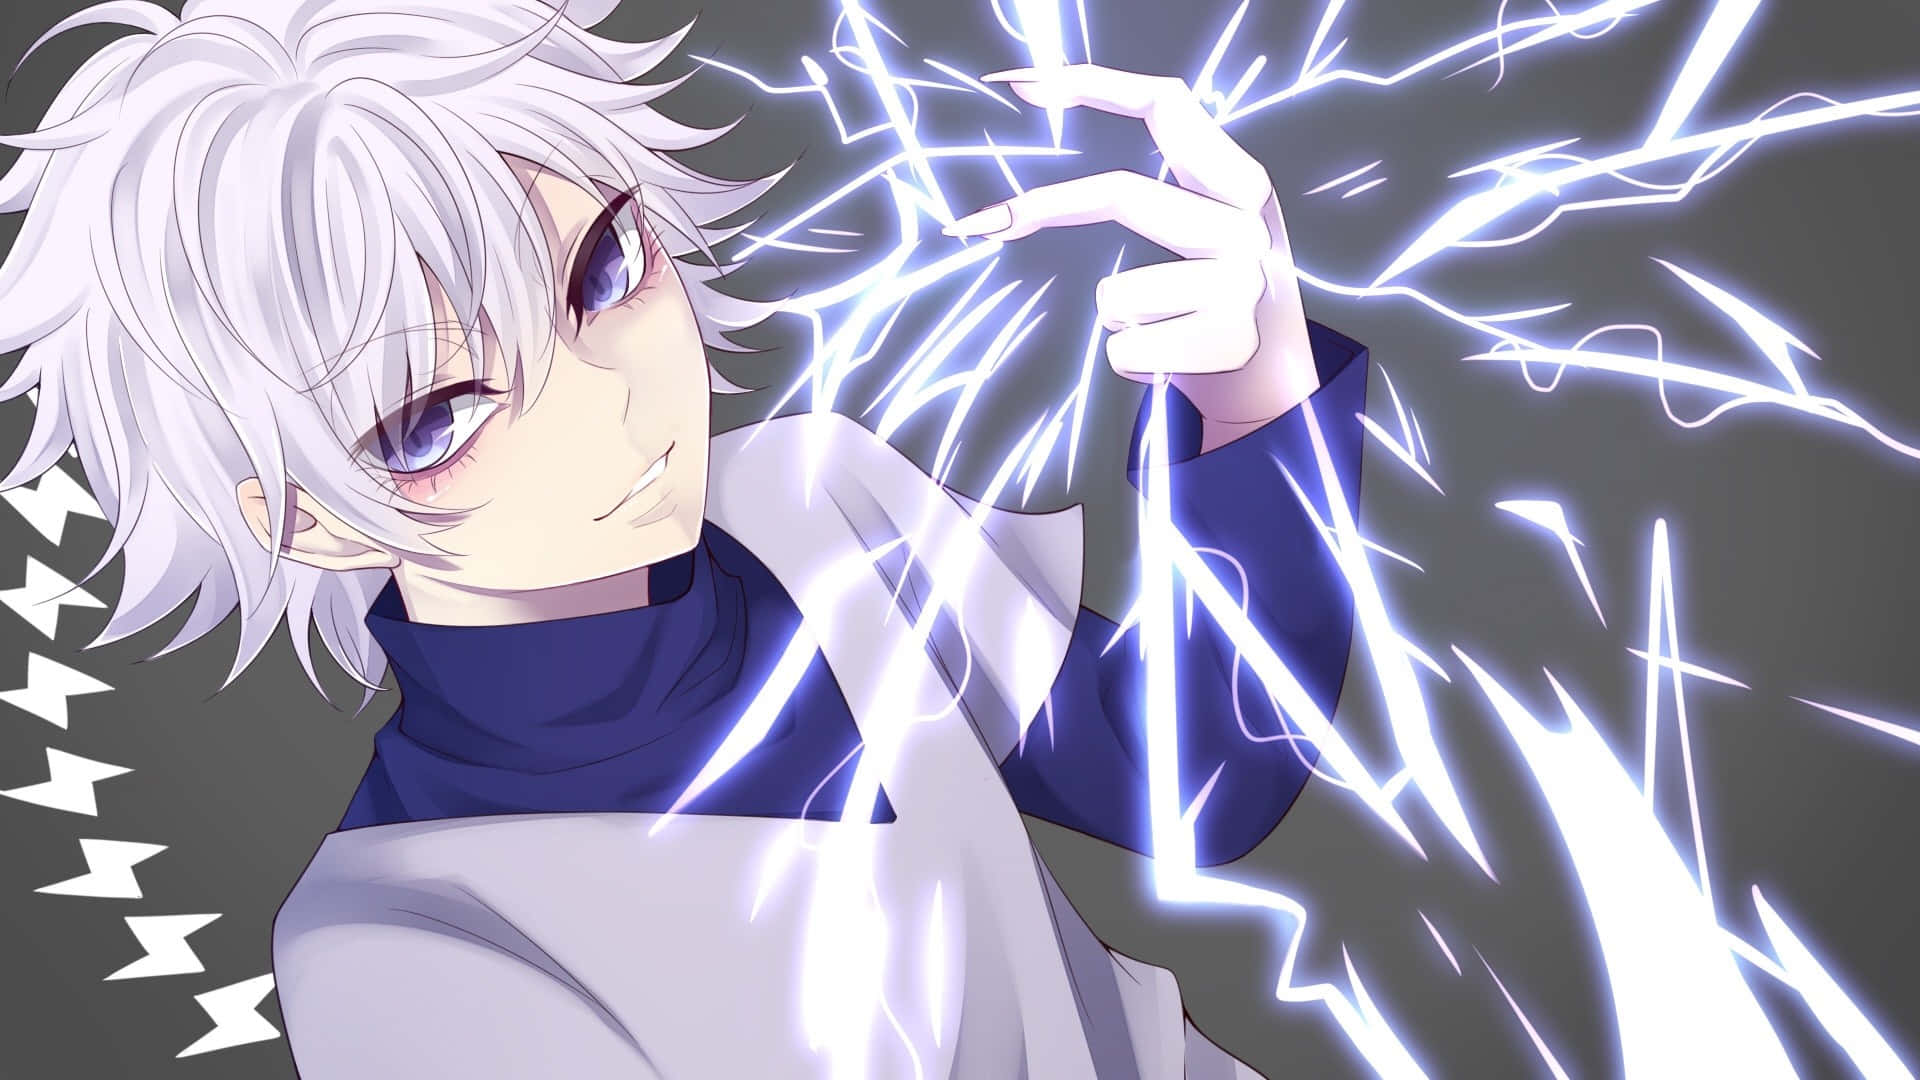 Get ready to take on the world with Killua!